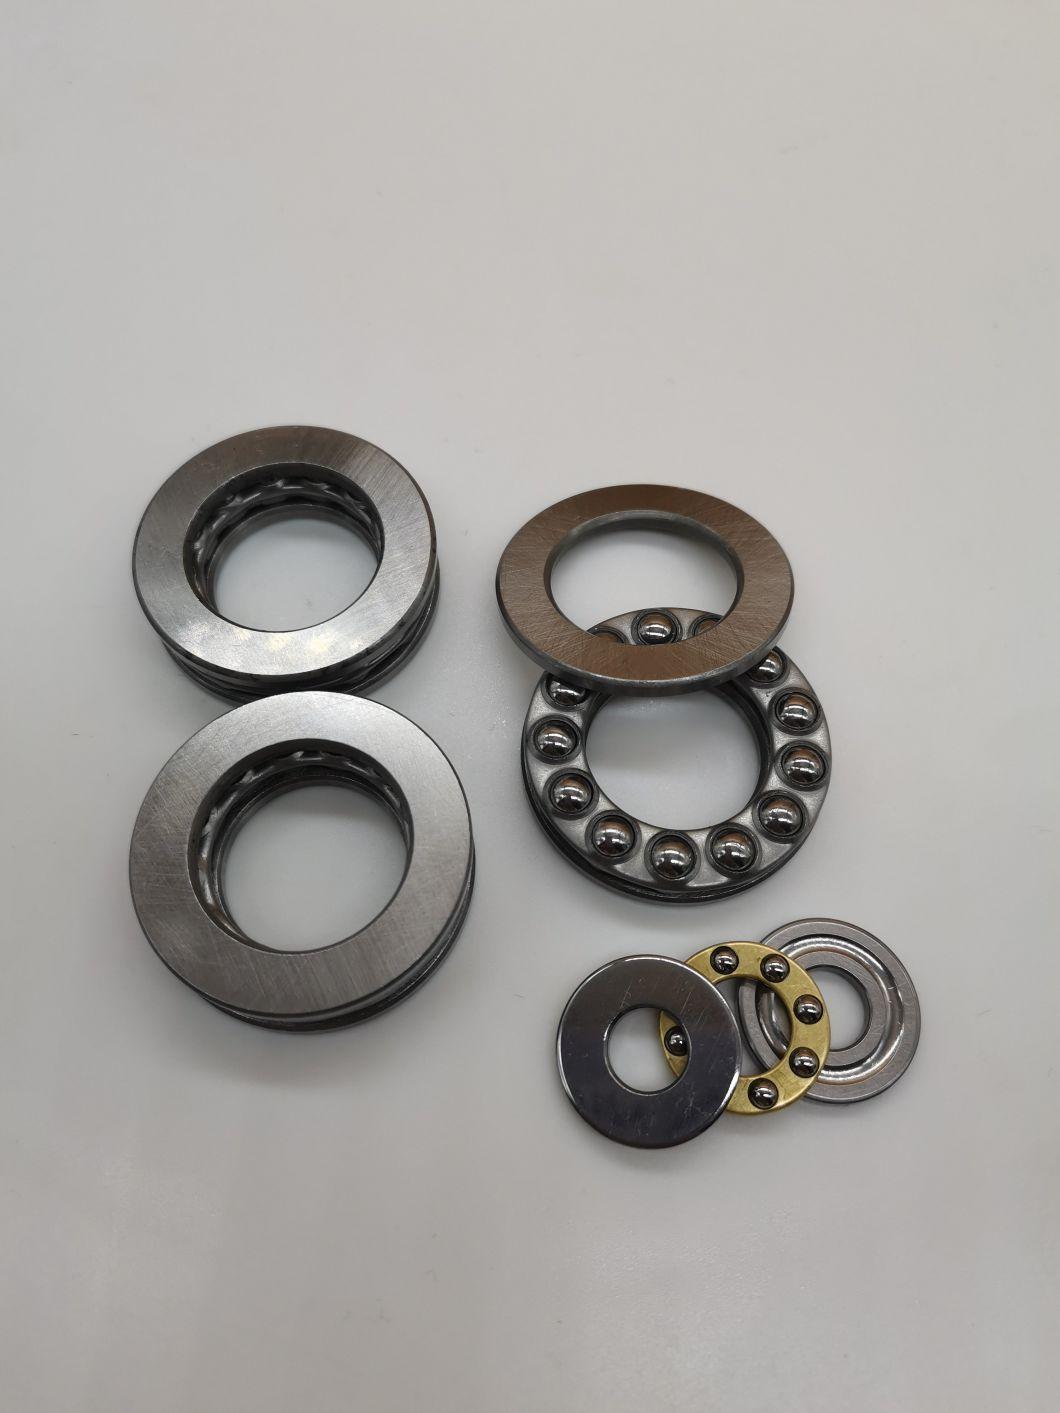 Unidirectional Thrust Ball Bearings/Low Speed Reducer/Foda High Quality Bearings Instead of Koyo Bearings/Thrust Ball Bearings of 51406